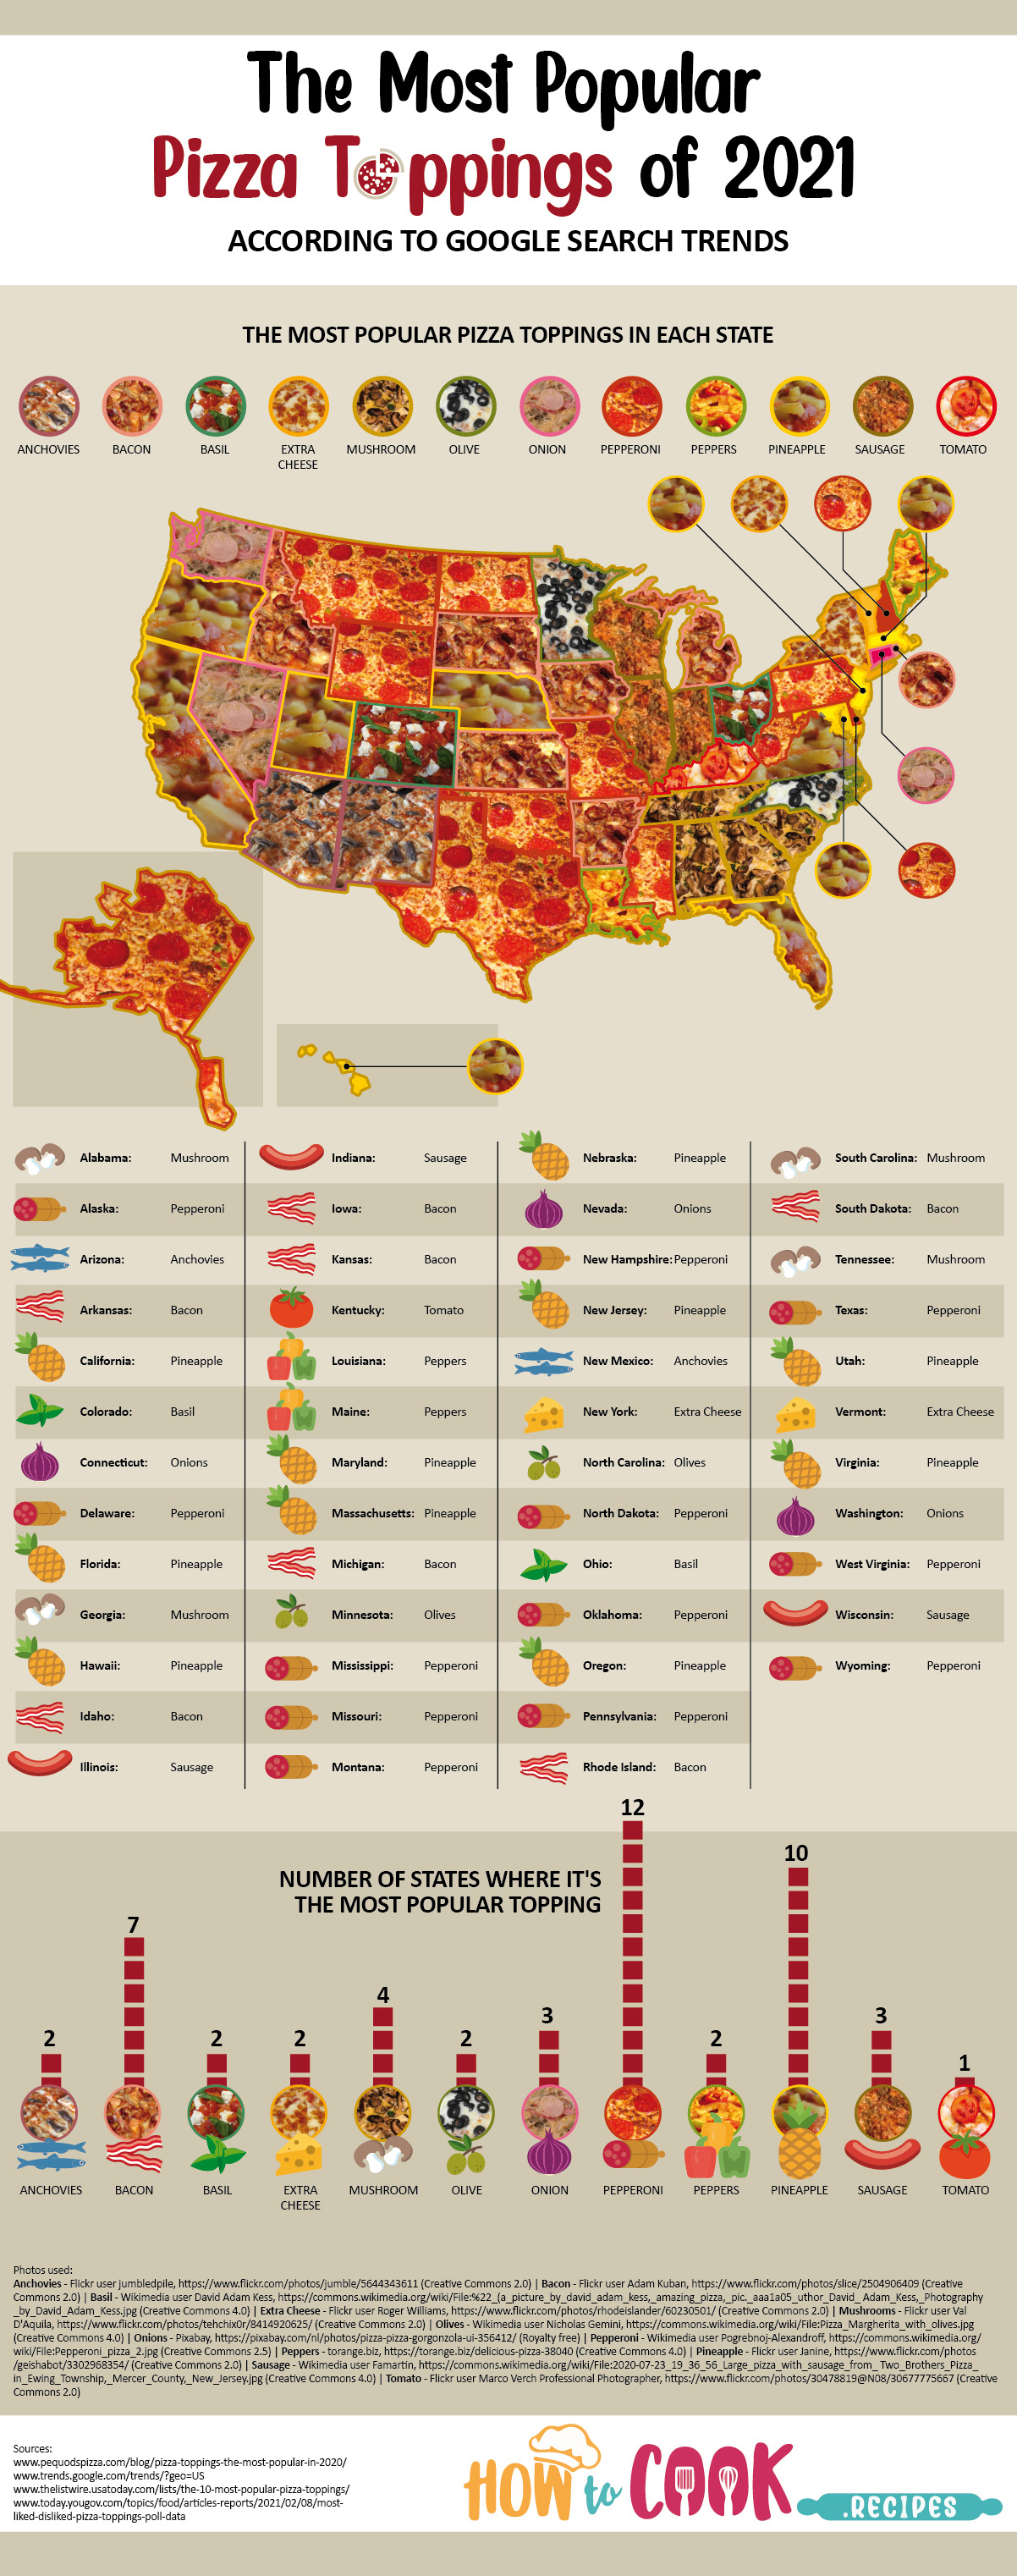 The Most Popular Pizza Toppings by State in 2021